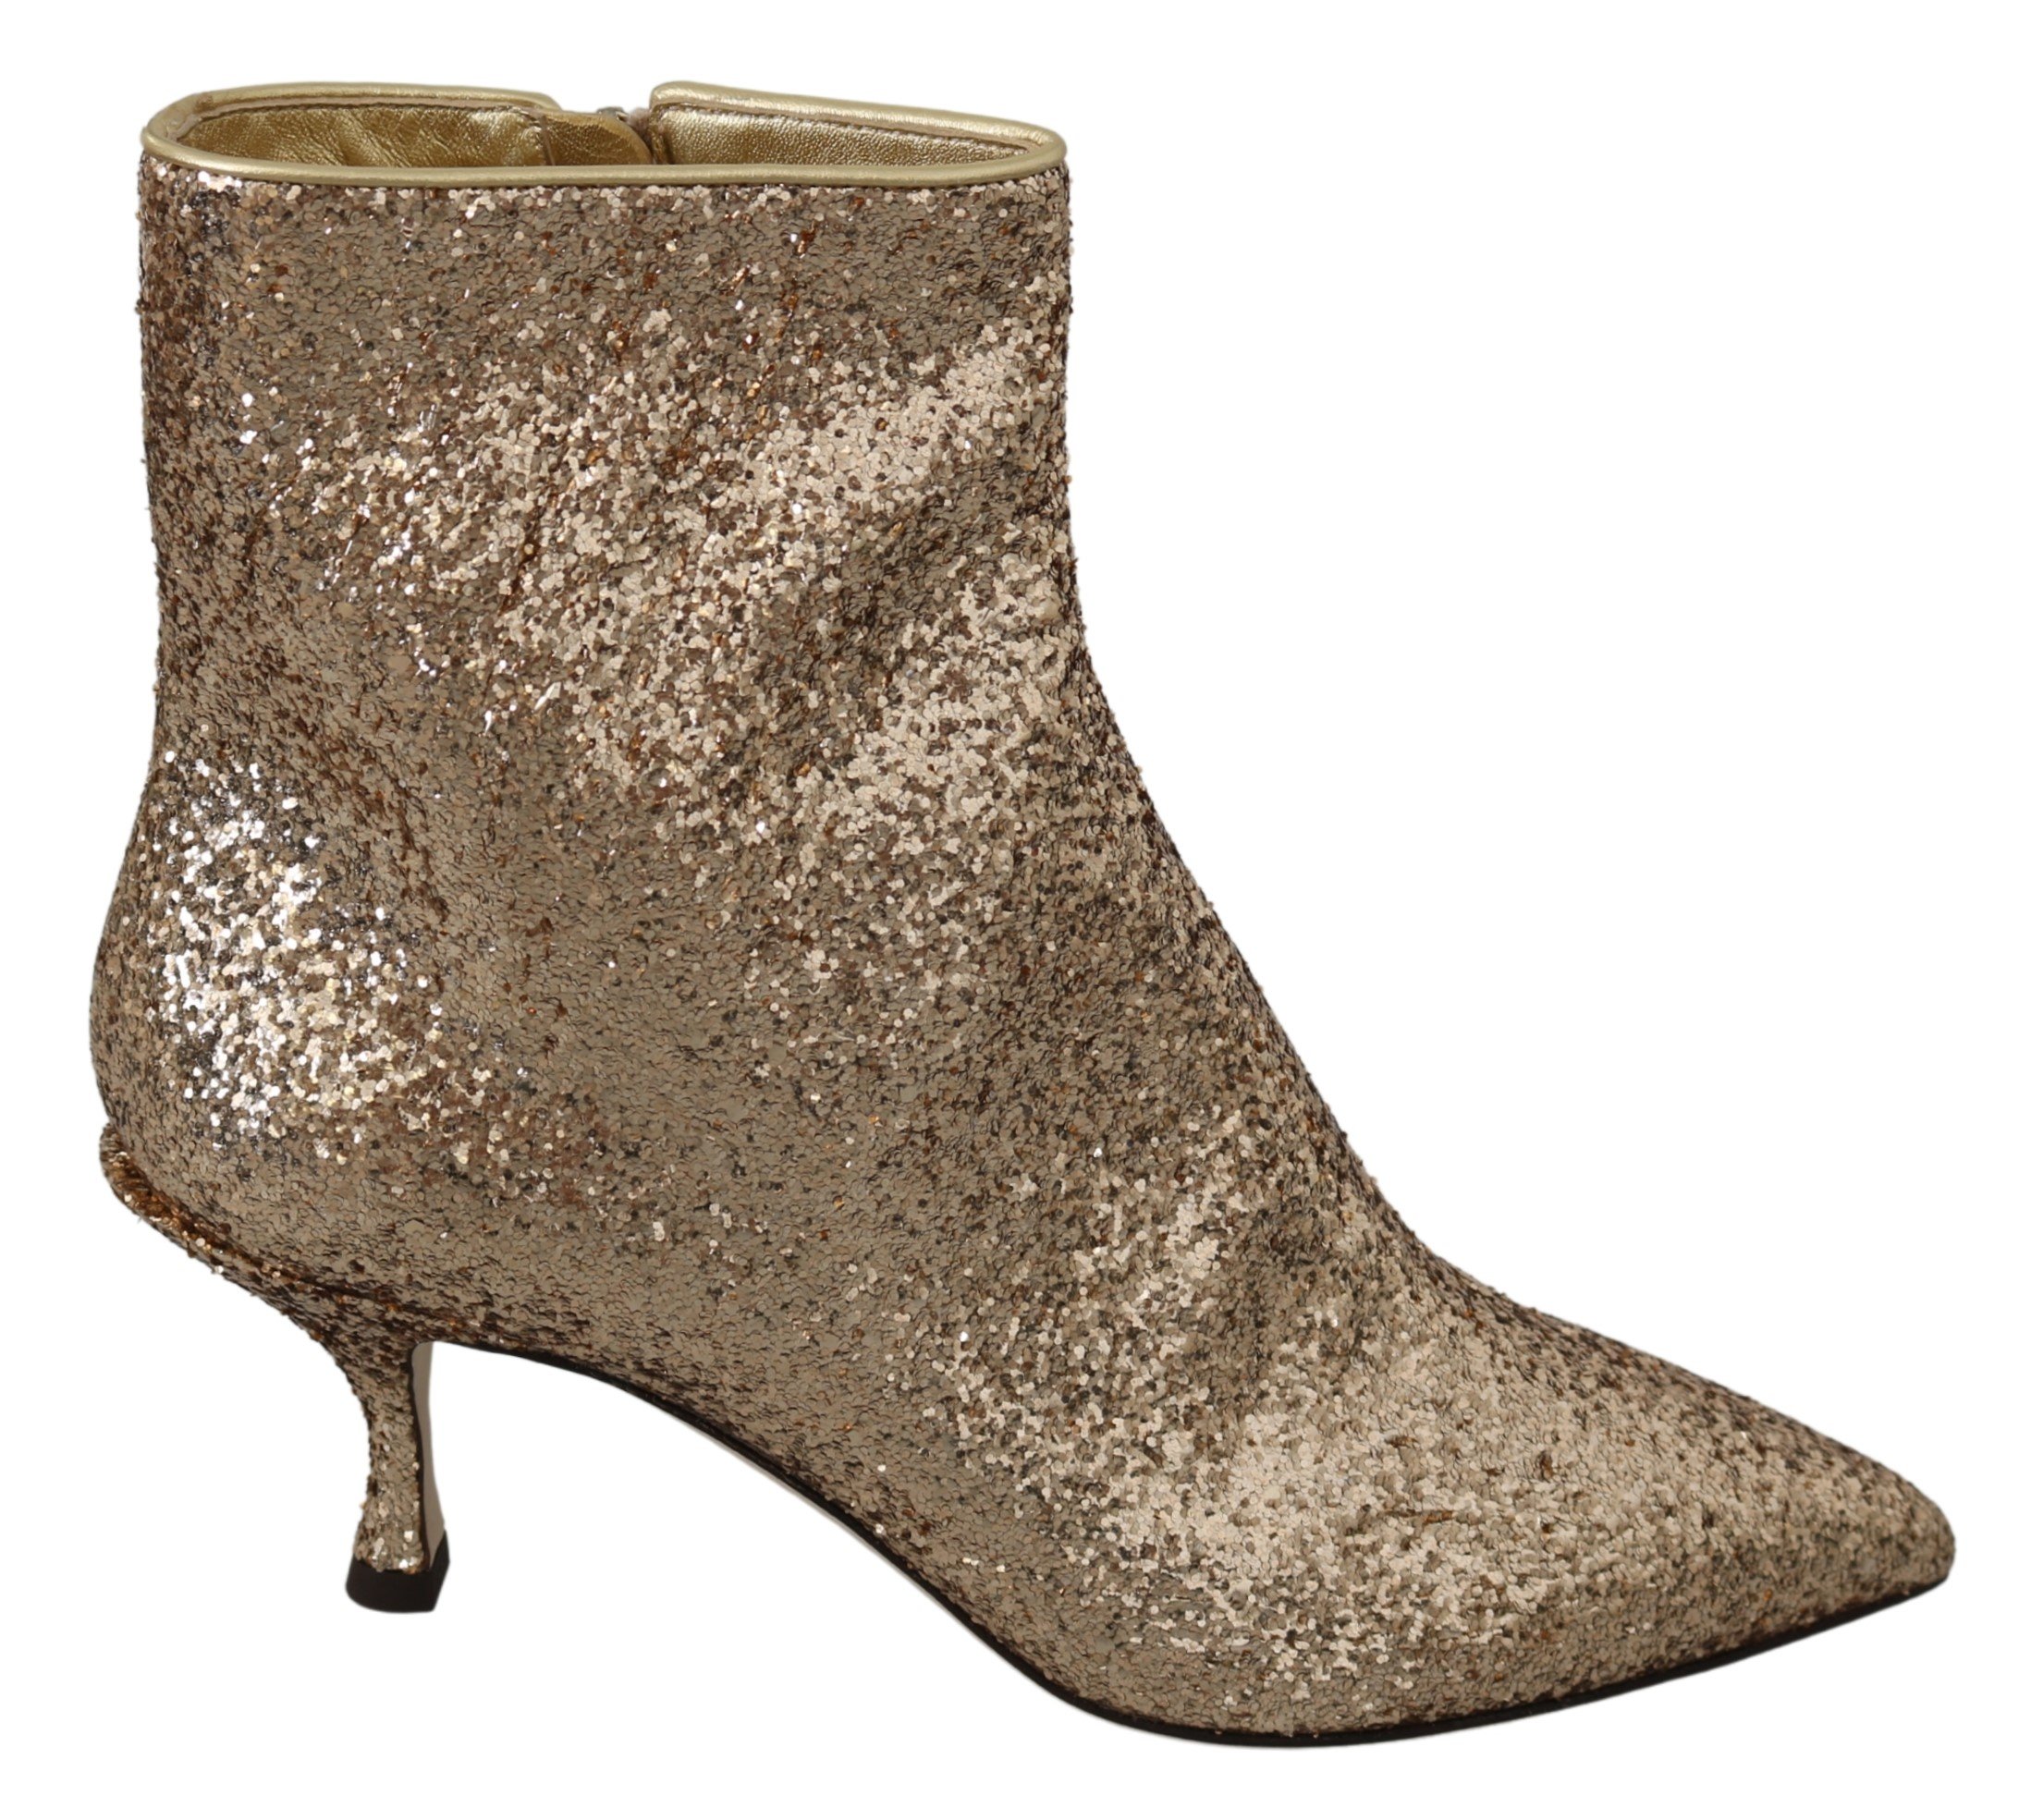 Gold Sequined Glitter Ankle Booties Shoes - EU39/US8.5